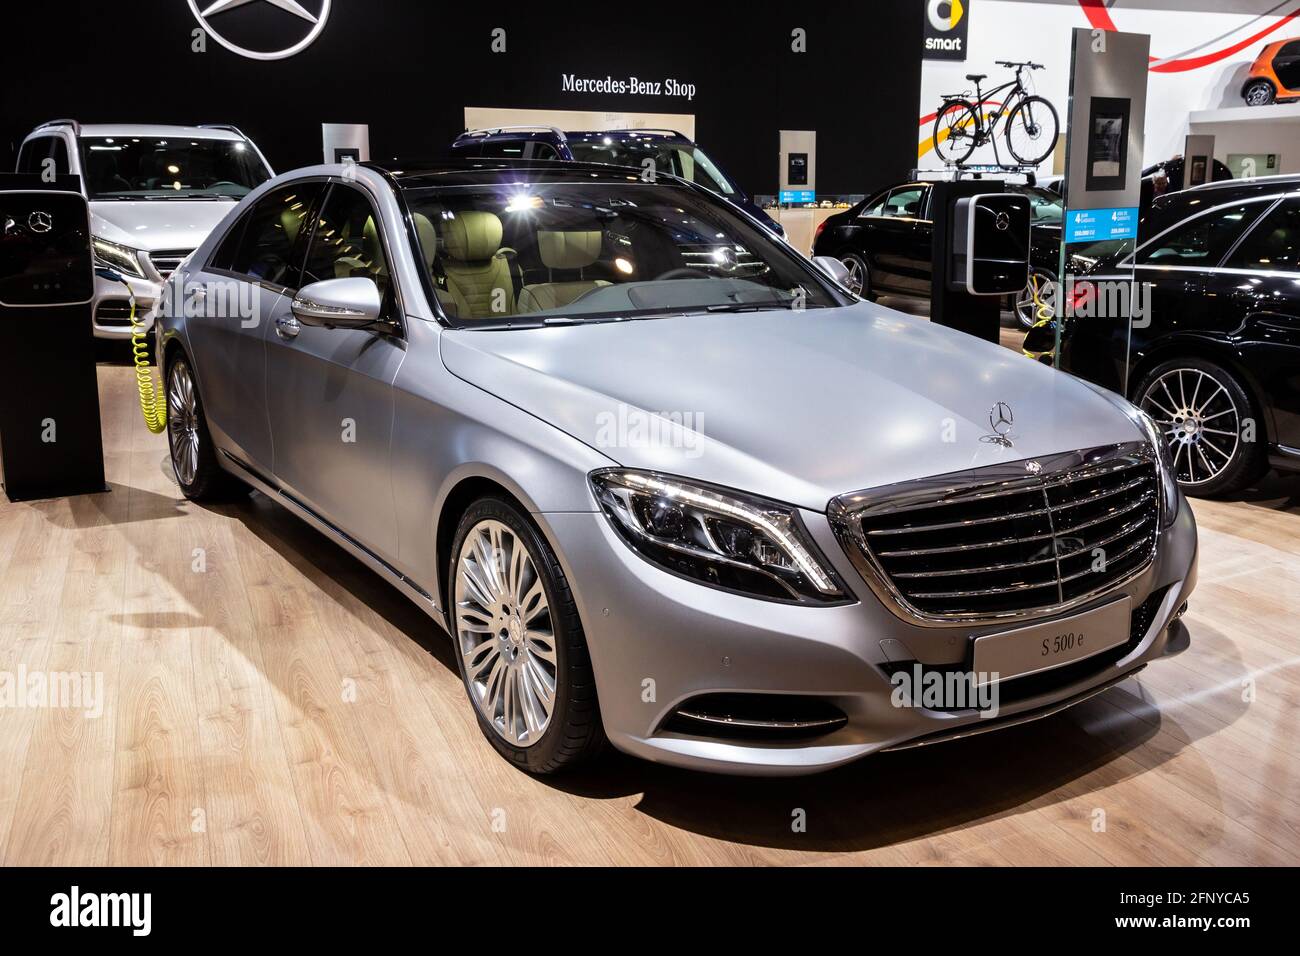 Mercedes Benz S 500 e plug-in hybrid car at the Brussels Expo Autosalon motor show. Belgium - January 12, 2016 Stock Photo